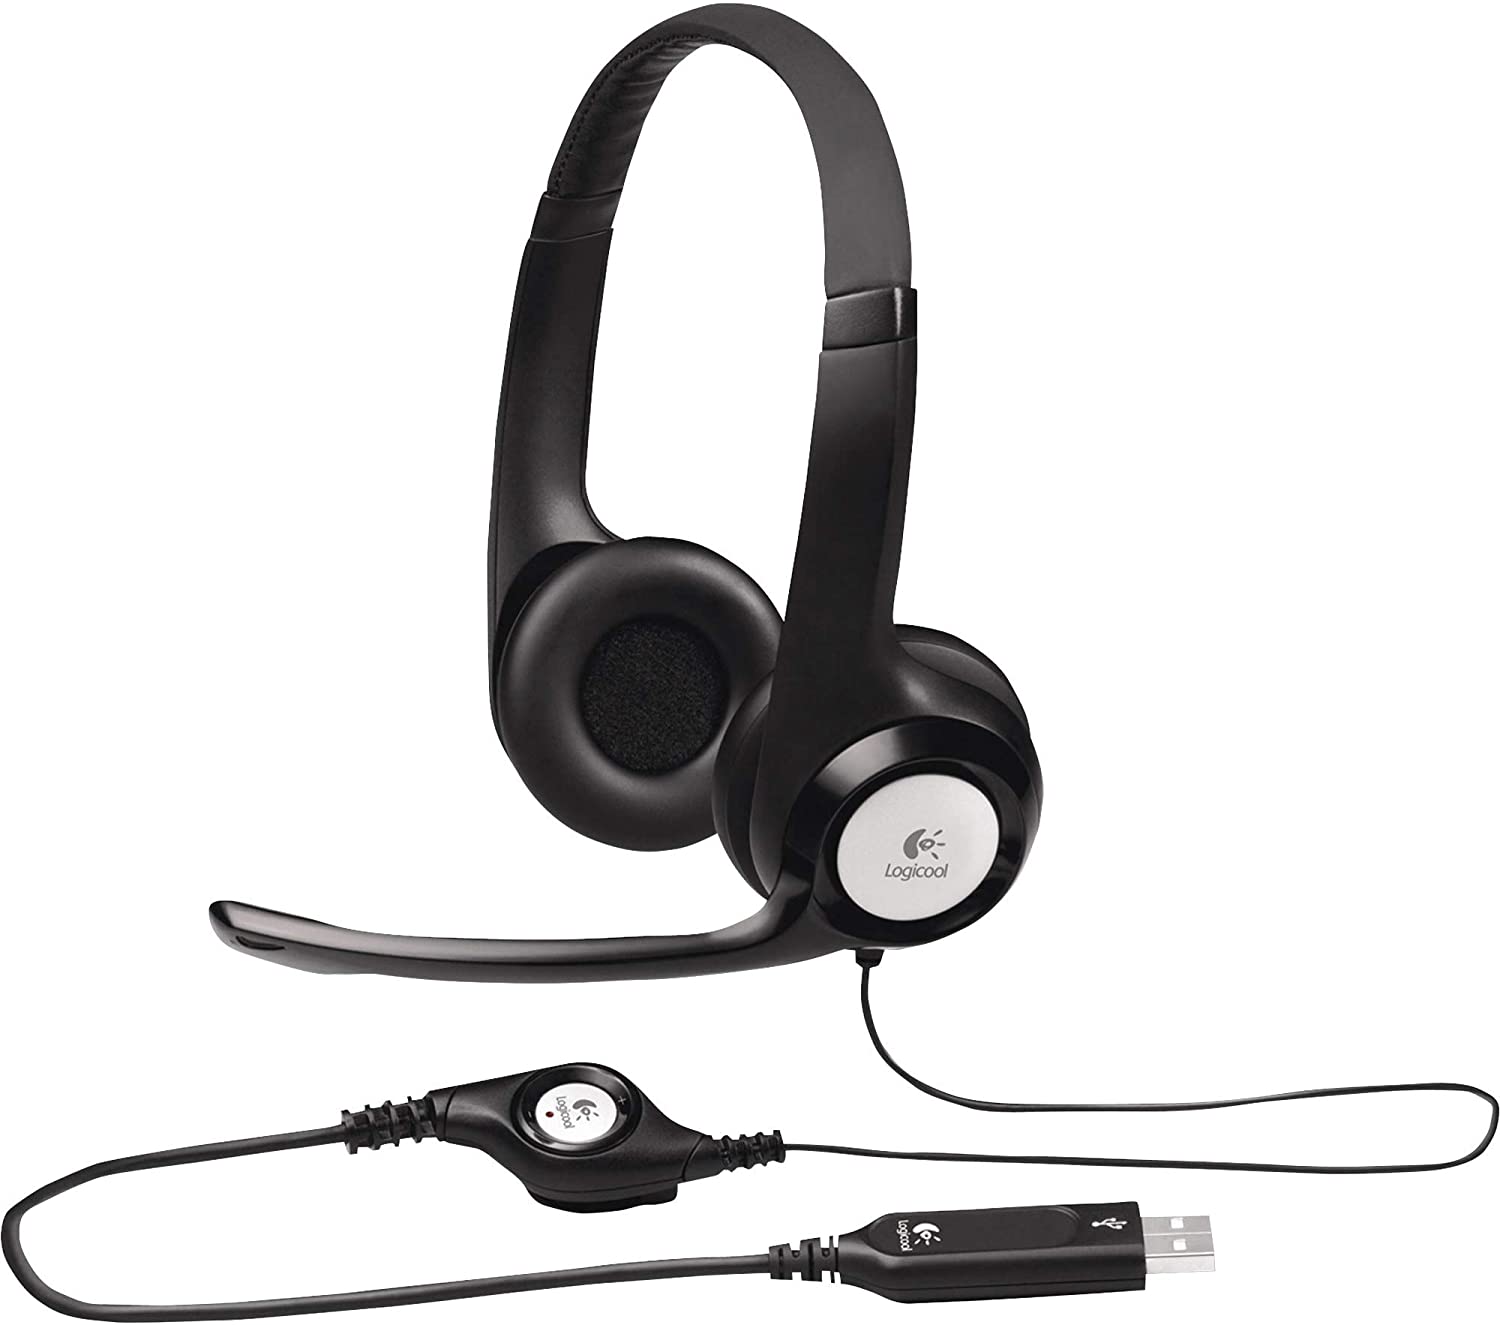 Logitech USB Headset H390 with Noise Cancelling Mic Bulk Package (Case of 20) - image 2 of 3